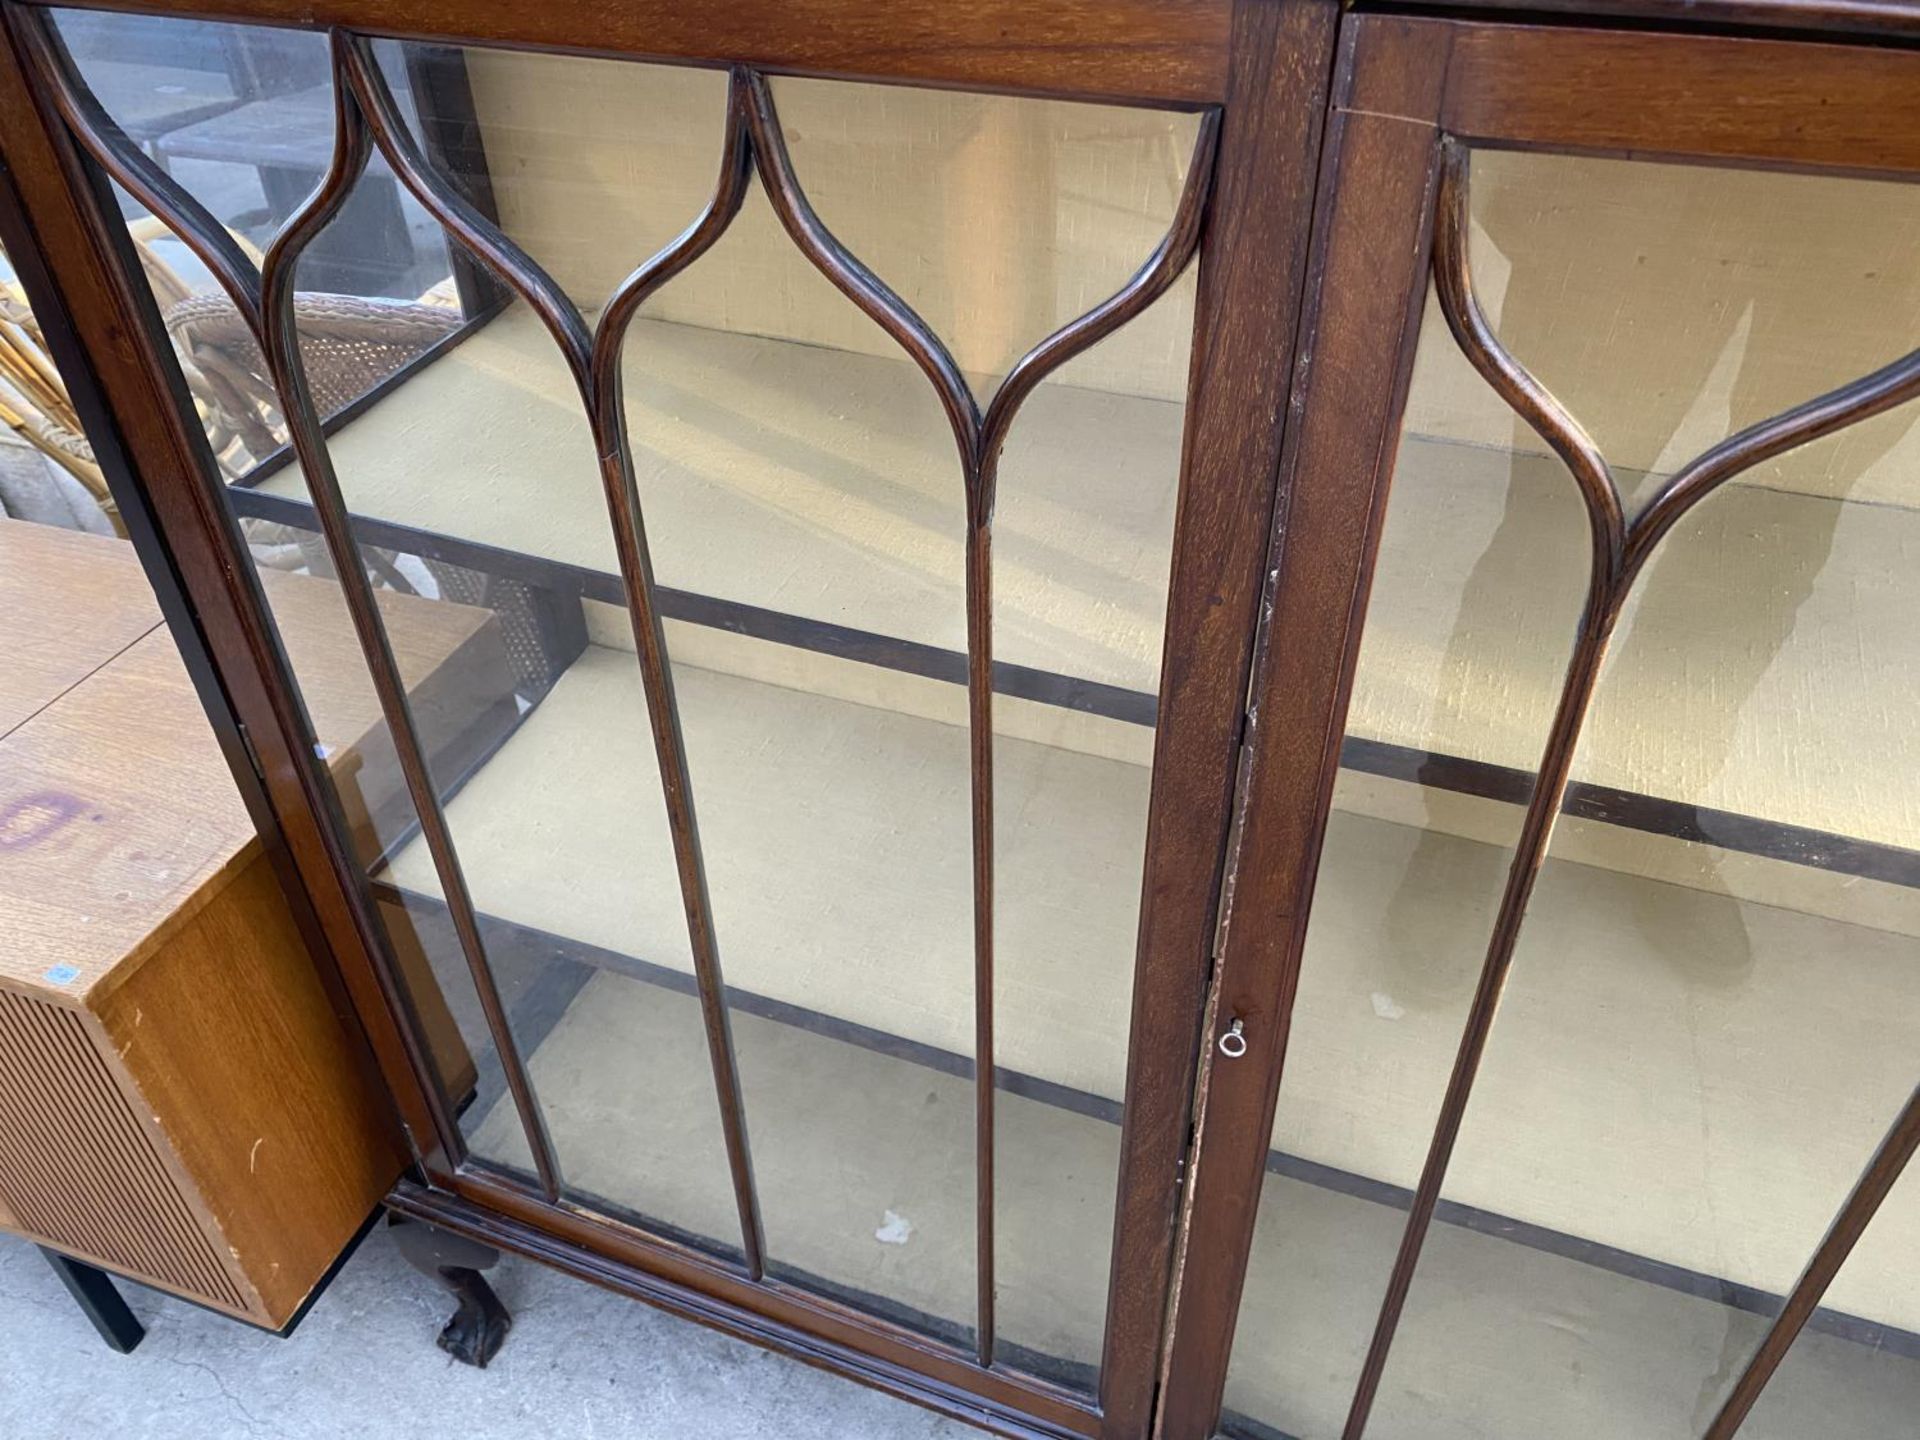 A MAHOGANY CHINA CABINET WITH TWO GLAZED PANEL DOORS AND SIDE PANELS - Image 3 of 4